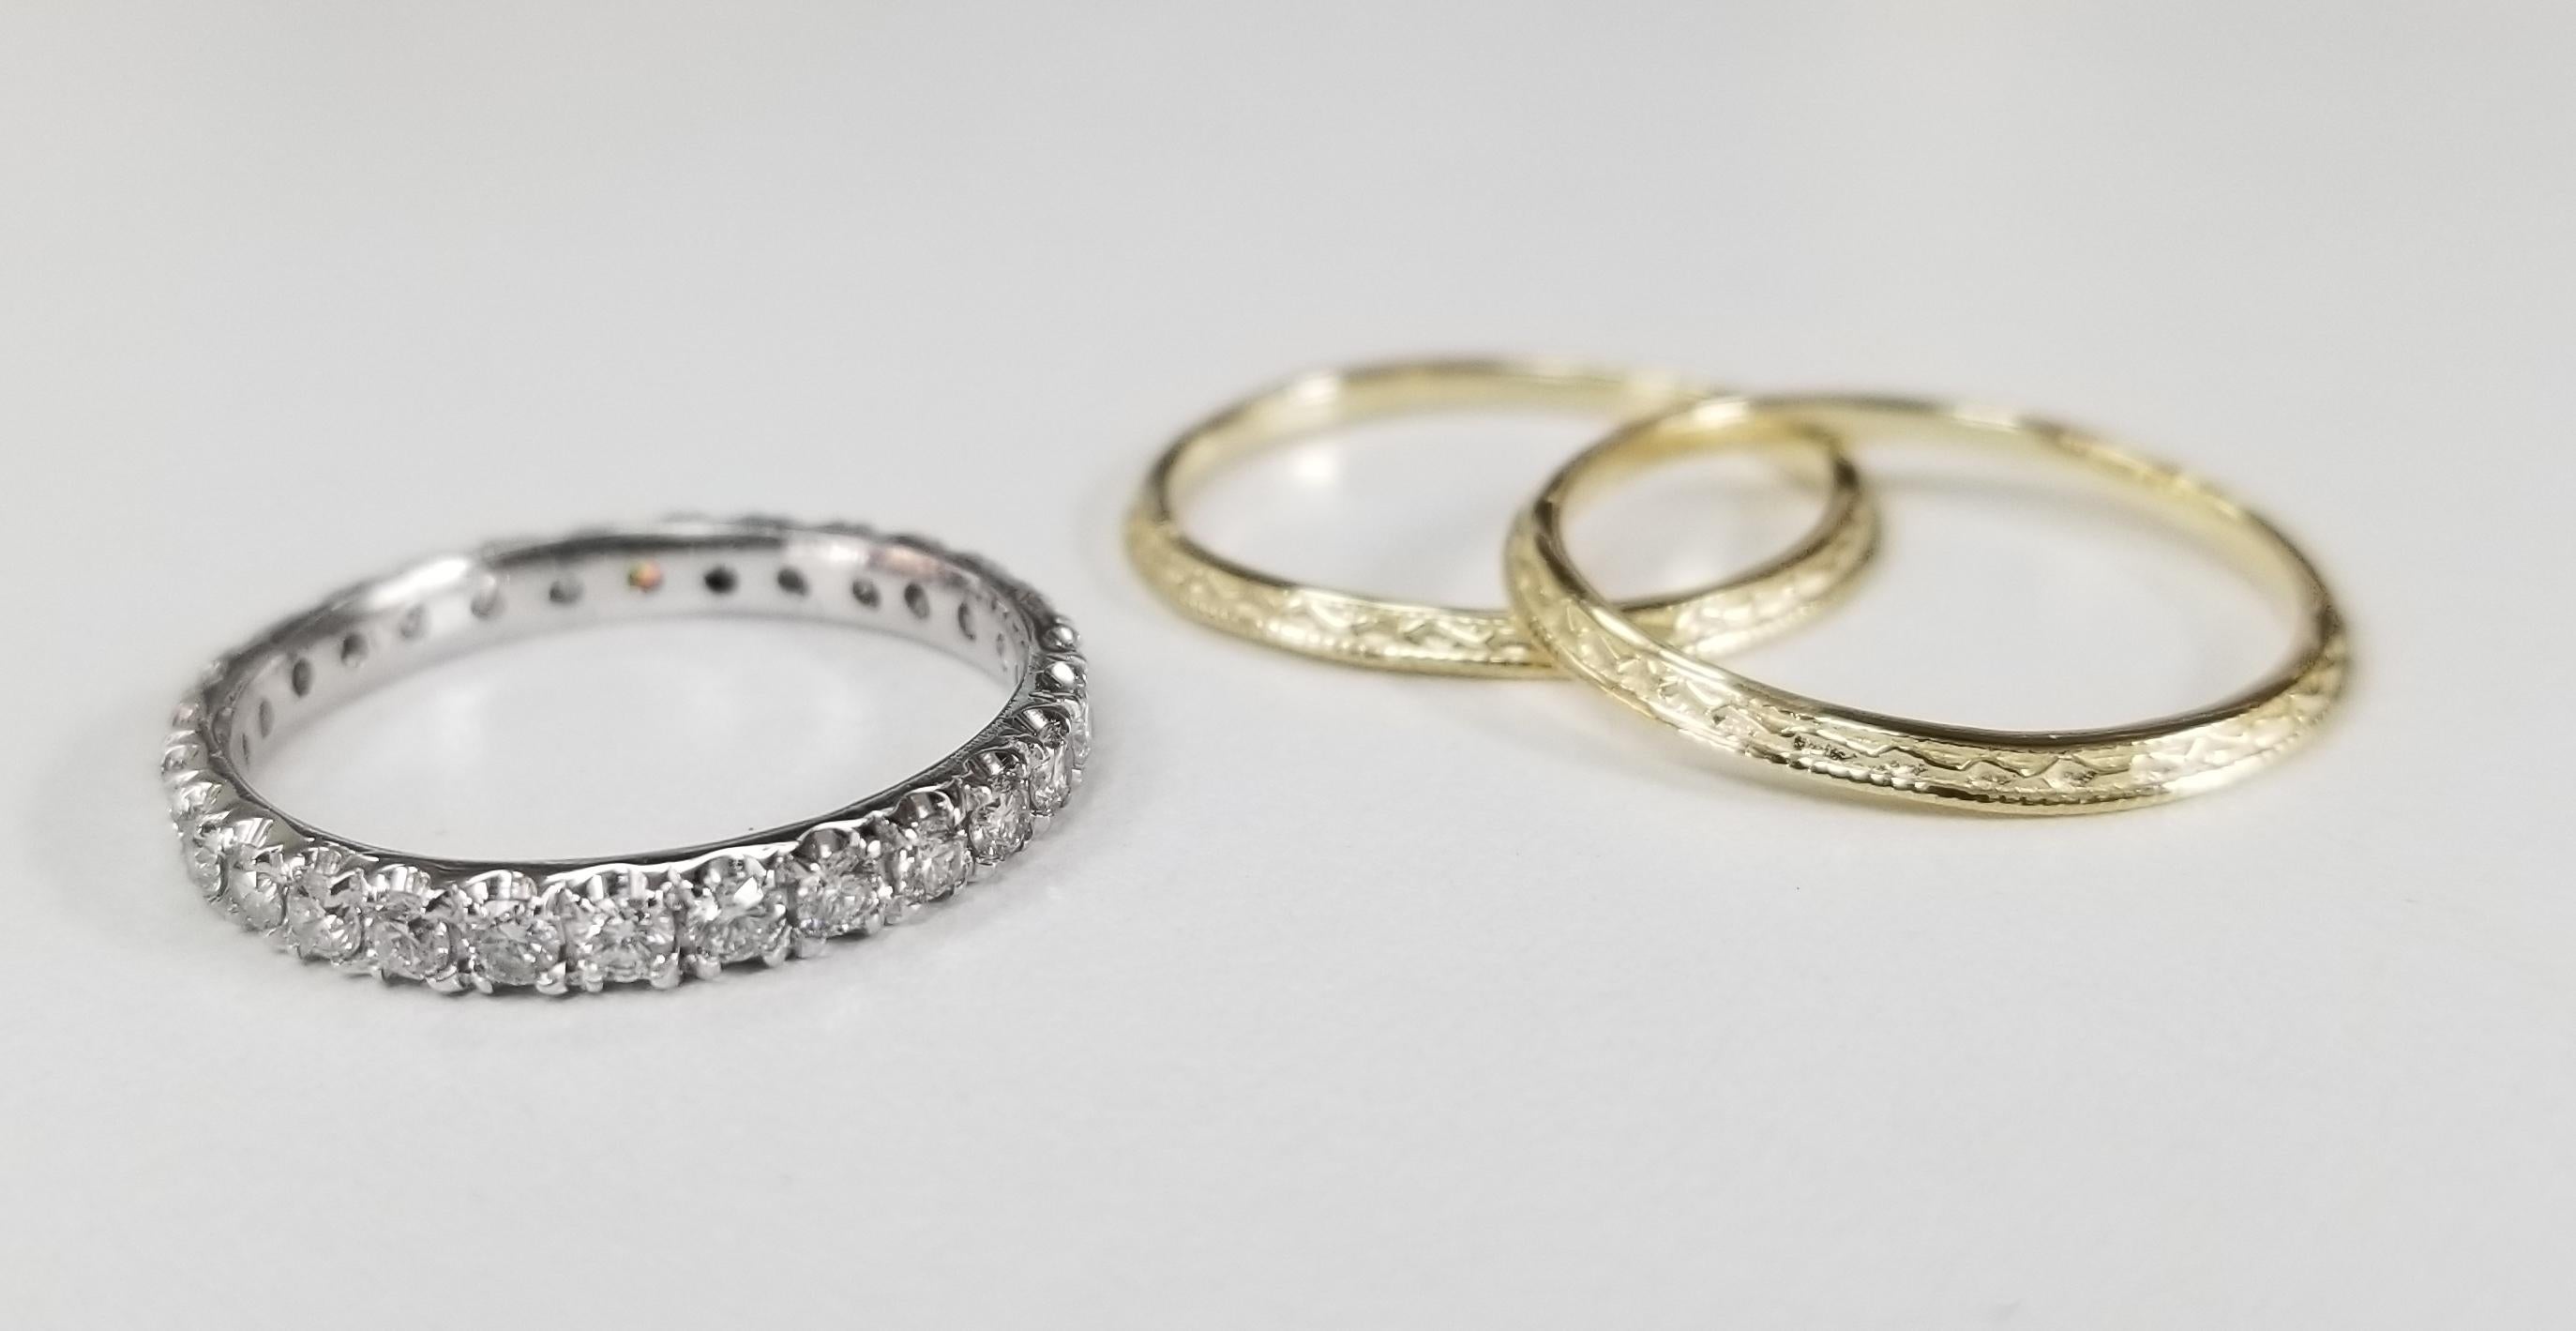 14k white gold diamond eternity ring with 28 round full cut diamonds of very fine quality weighing .70pts. with 2 14k yellow gold hand engraved beveled rings.  3 separate rings to mix and match. size 6